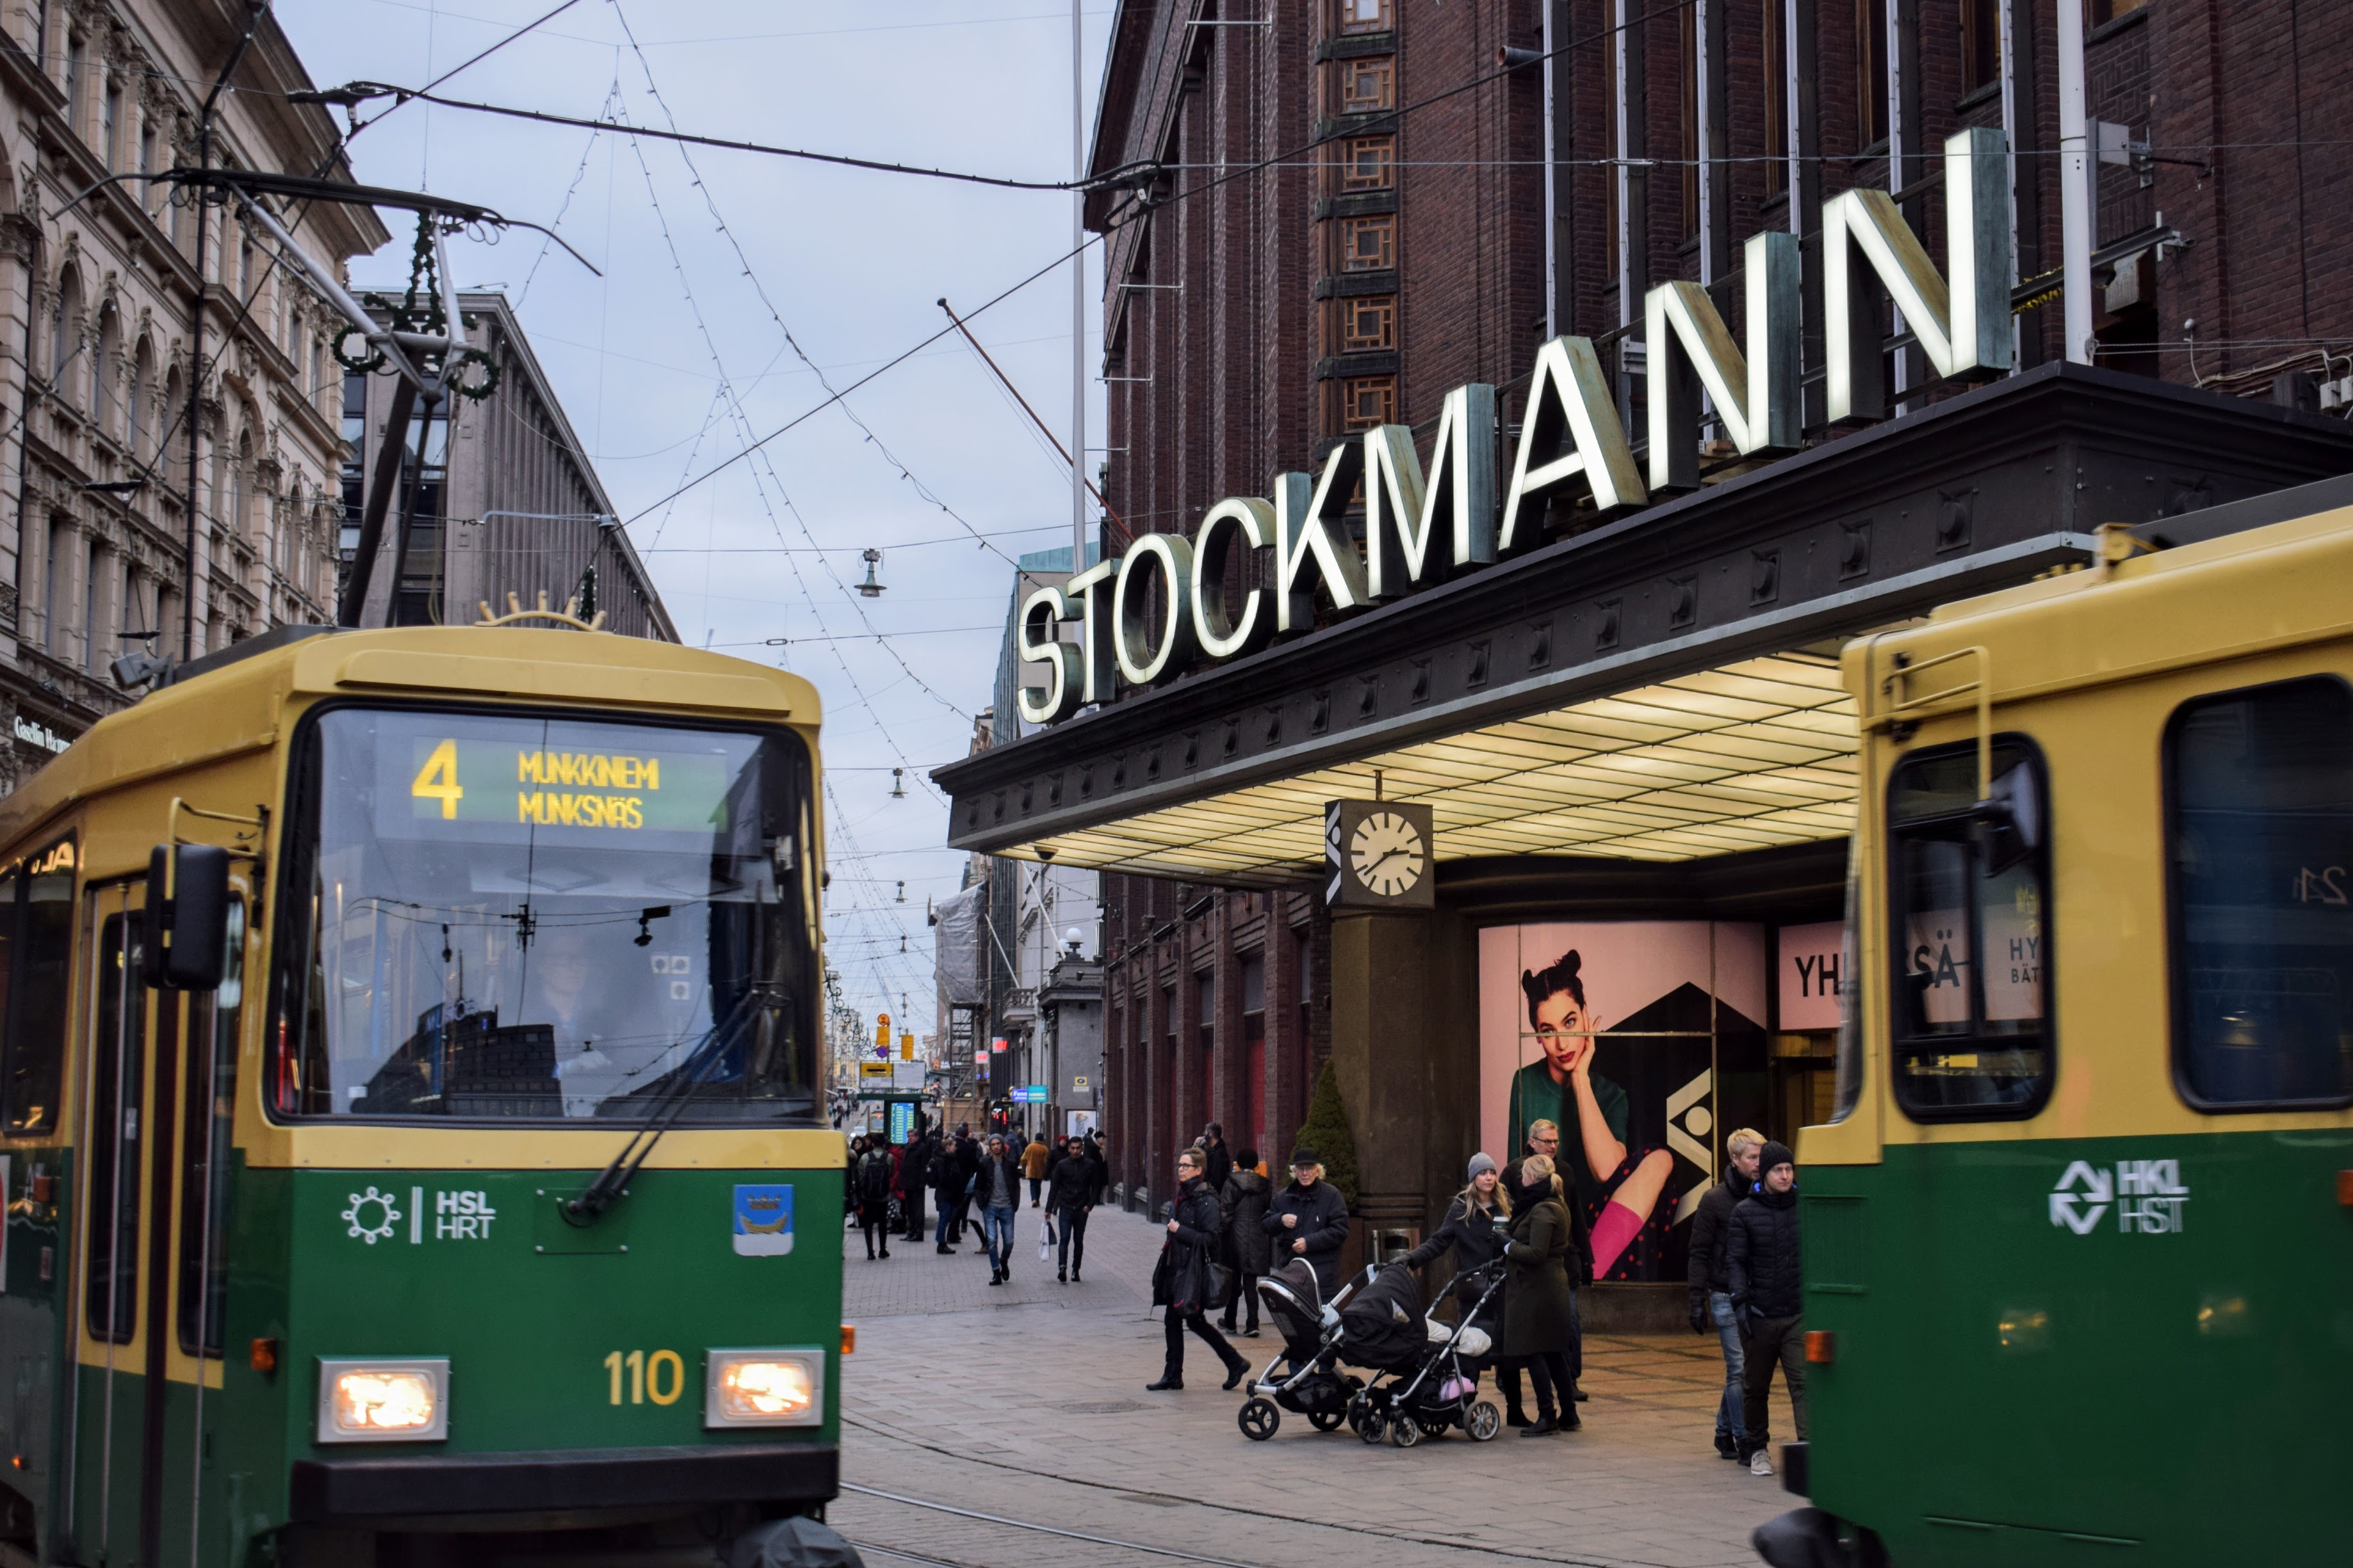 Stockmann is selling properties in Helsinki and the Baltic countries in a restructuring plan